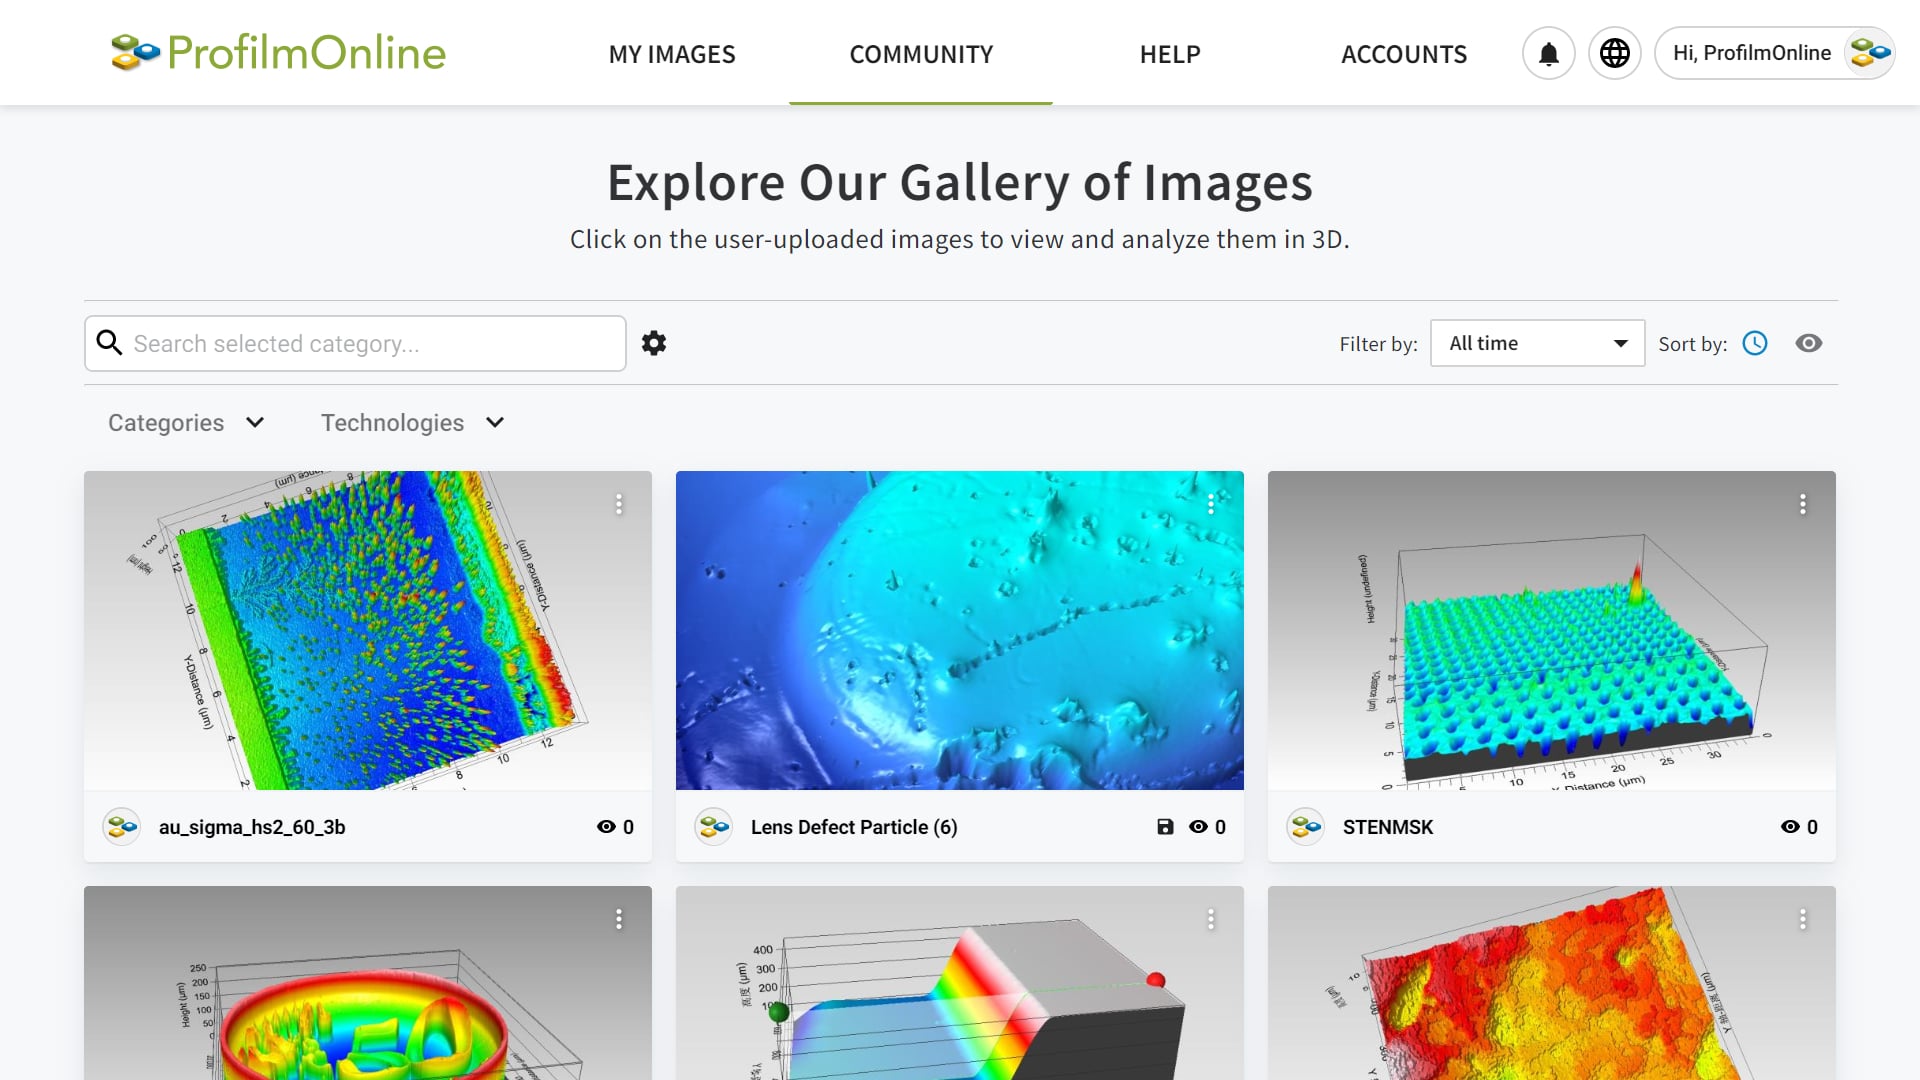 Display your images in our public galleries - let others see what you've discovered!